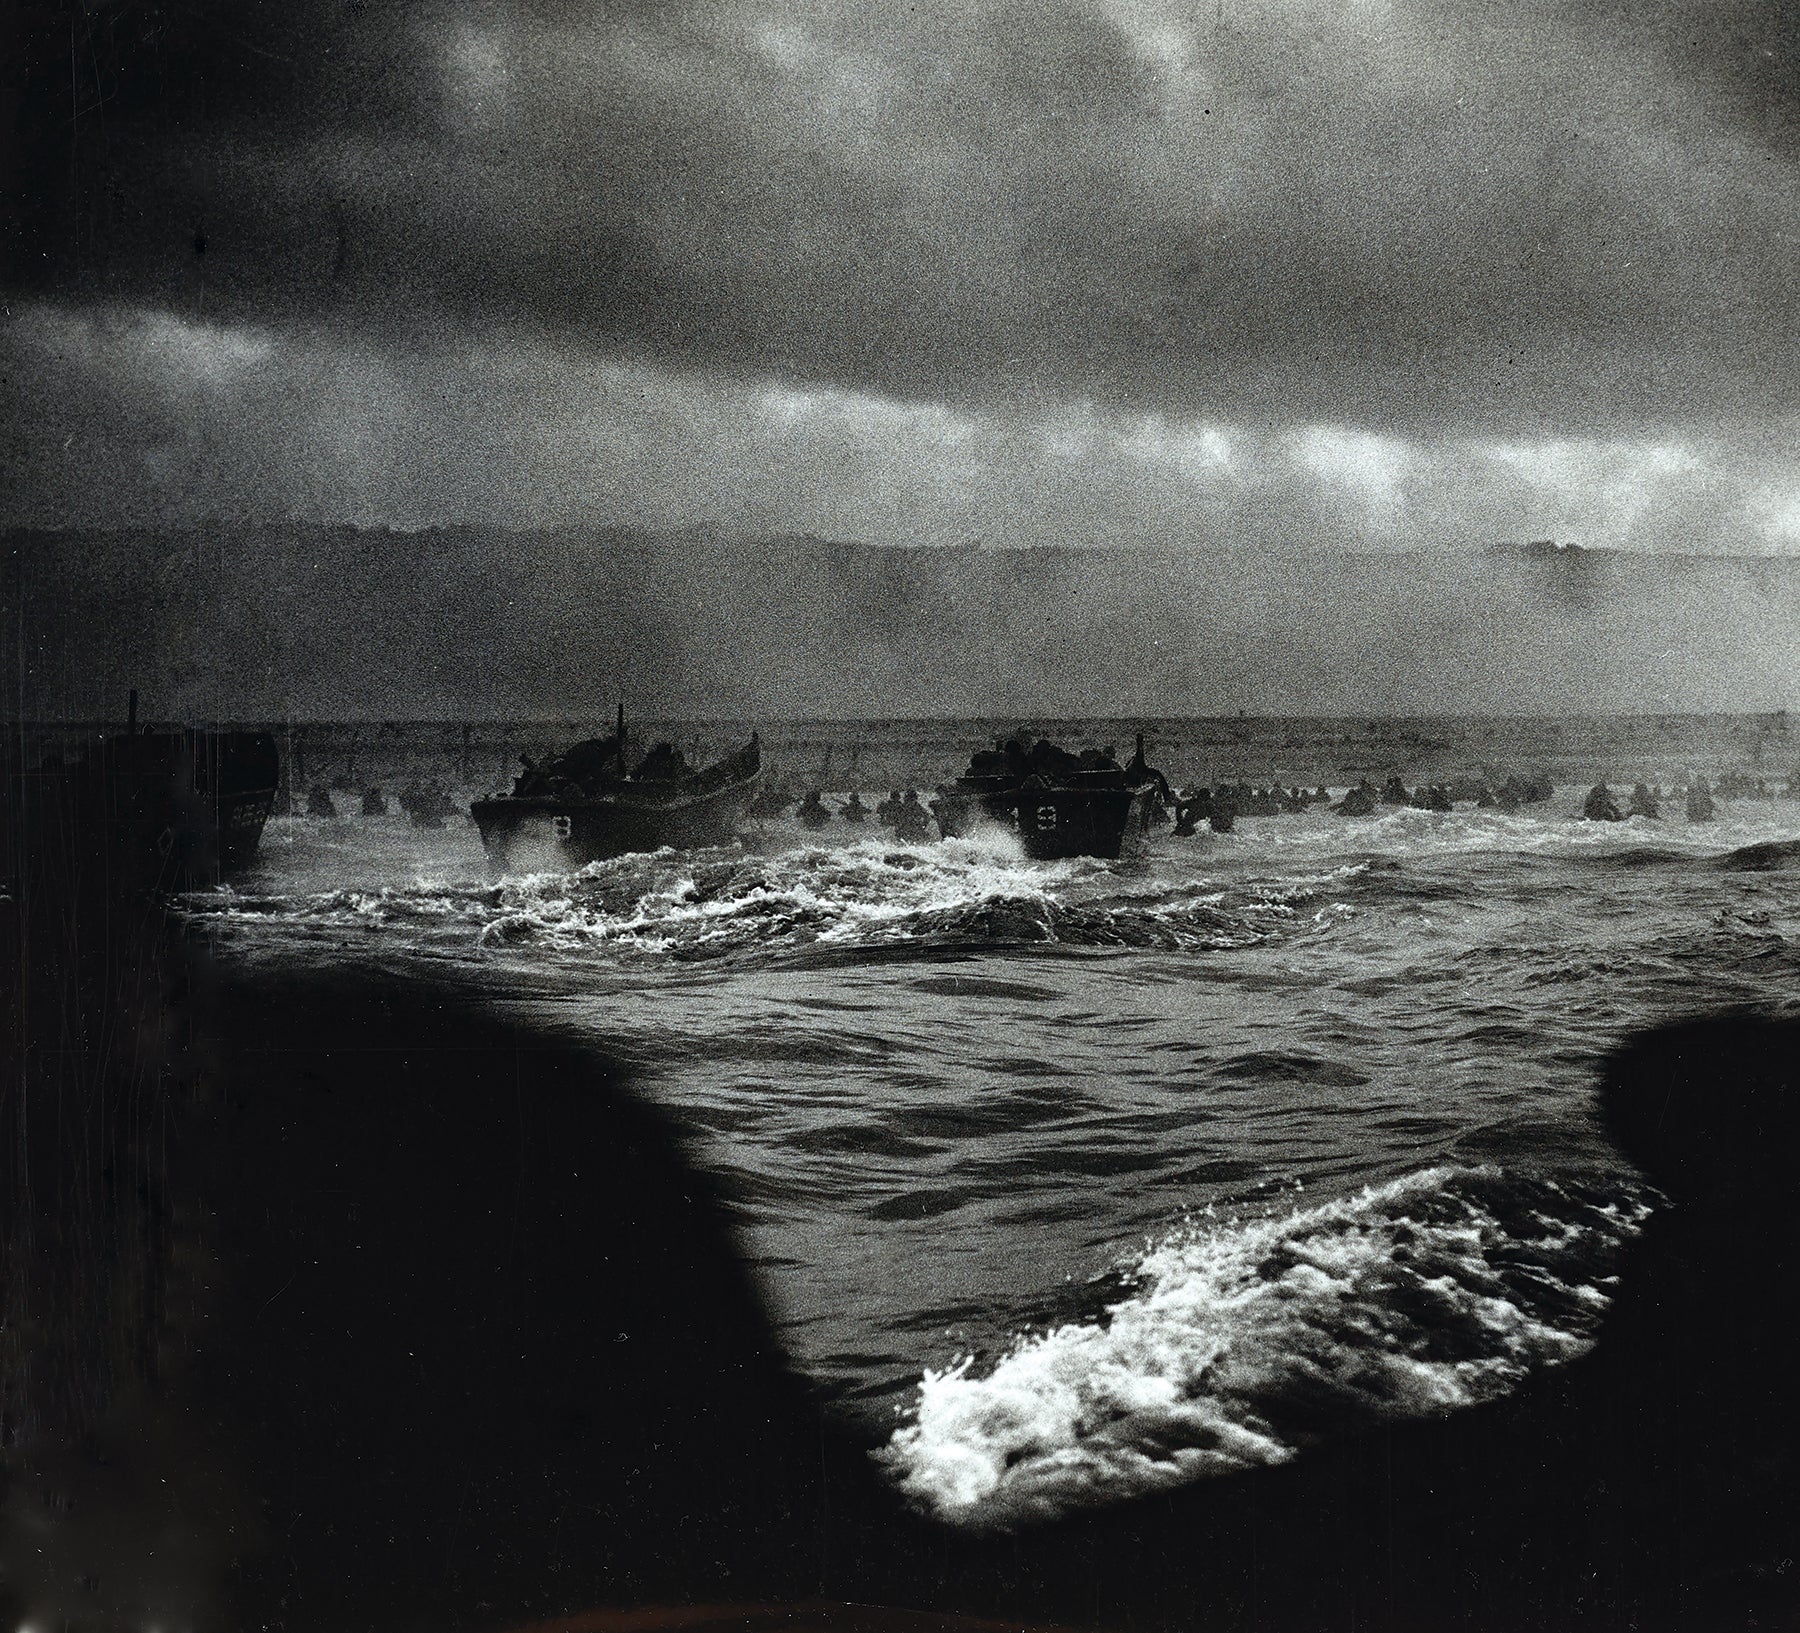 U.S. soldiers are ferried in U.S. Coast Guard vessels to the assault beaches of Normandy, France, on D-Day, June 6, 1944. (Credit: National Archives)